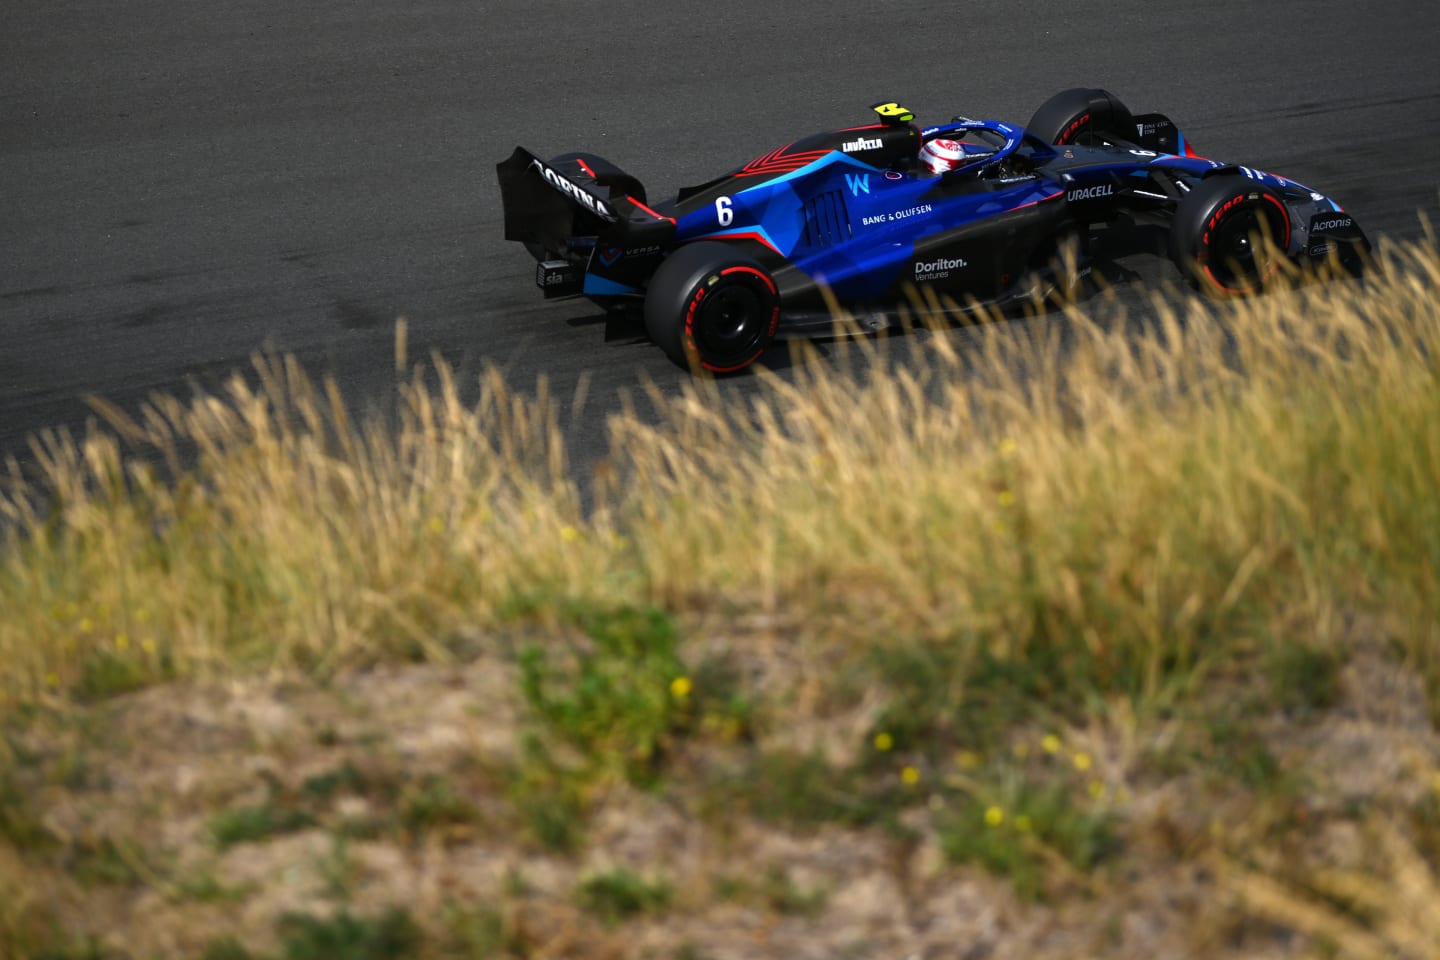 ZANDVOORT, NETHERLANDS - SEPTEMBER 02: Nicholas Latifi of Canada driving the (6) Williams FW44 Mercedes on track during practice ahead of the F1 Grand Prix of The Netherlands at Circuit Zandvoort on September 02, 2022 in Zandvoort, Netherlands. (Photo by Dan Mullan/Getty Images)